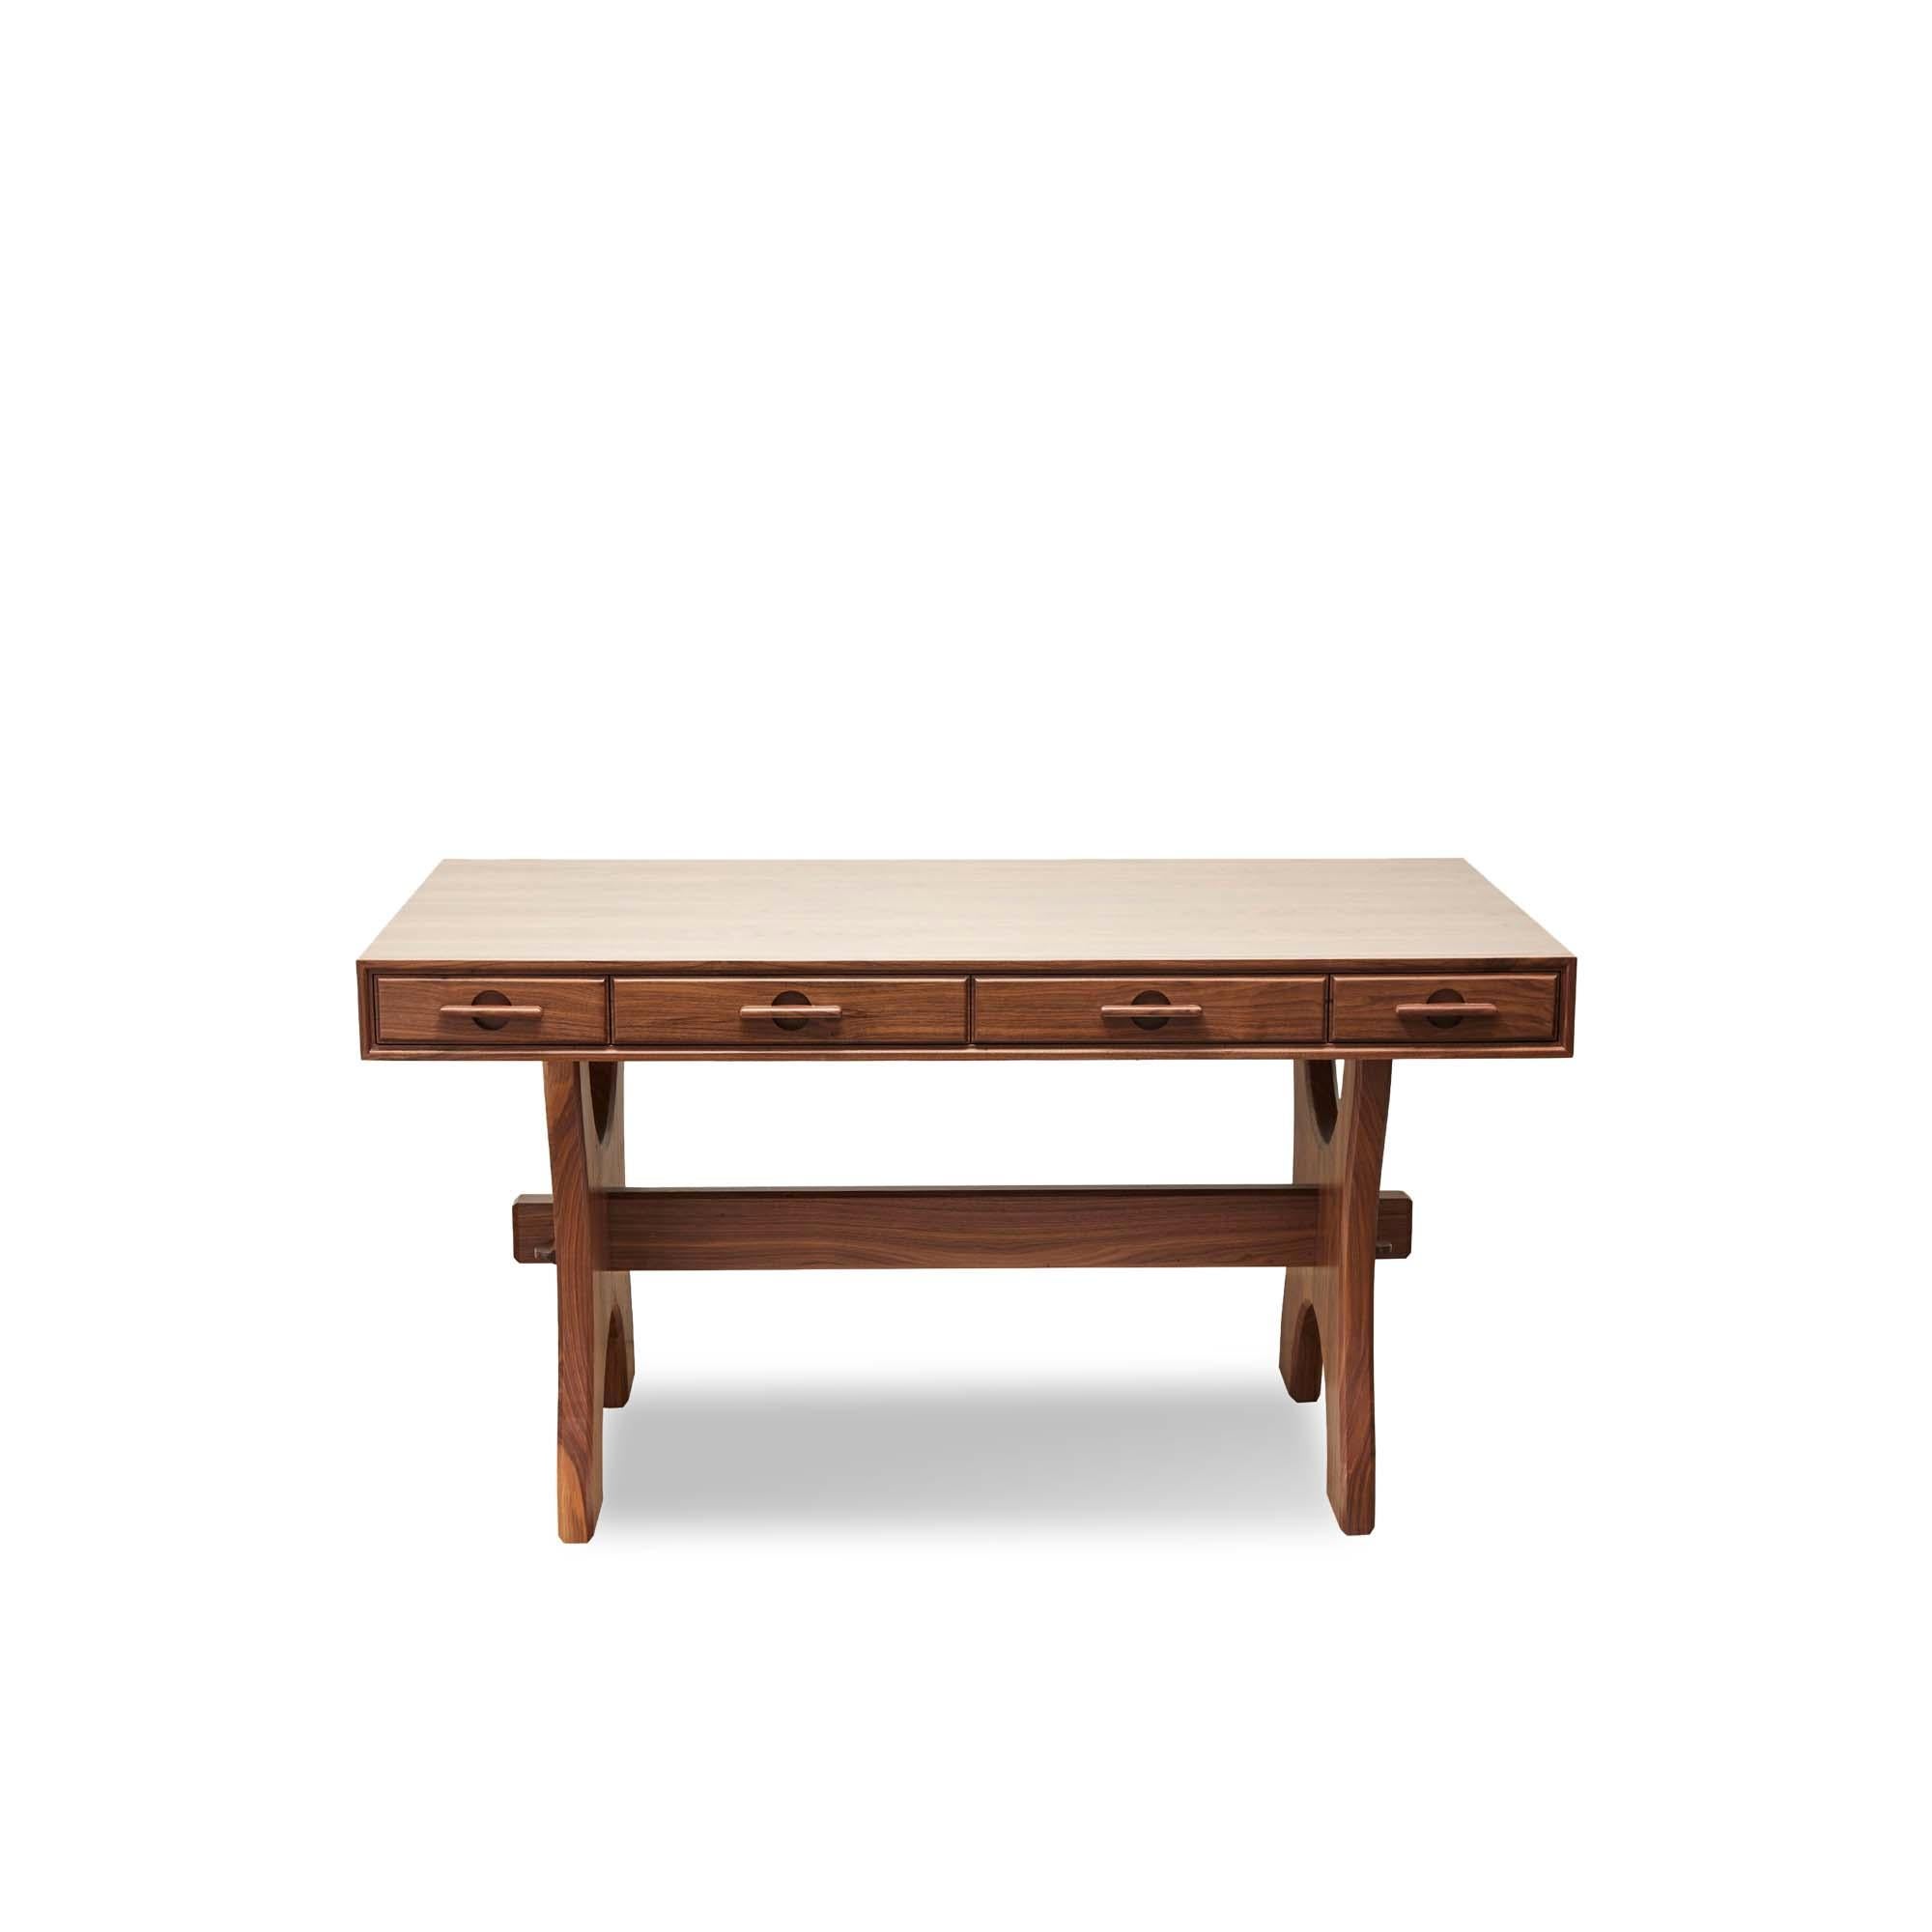 The Ojai desk has four drawers and features solid American walnut or white oak trestle legs. The drawer handles are made of solid carved wood. Shown here in Natural Walnut. 

The Lawson-Fenning Collection is designed and handmade in Los Angeles,